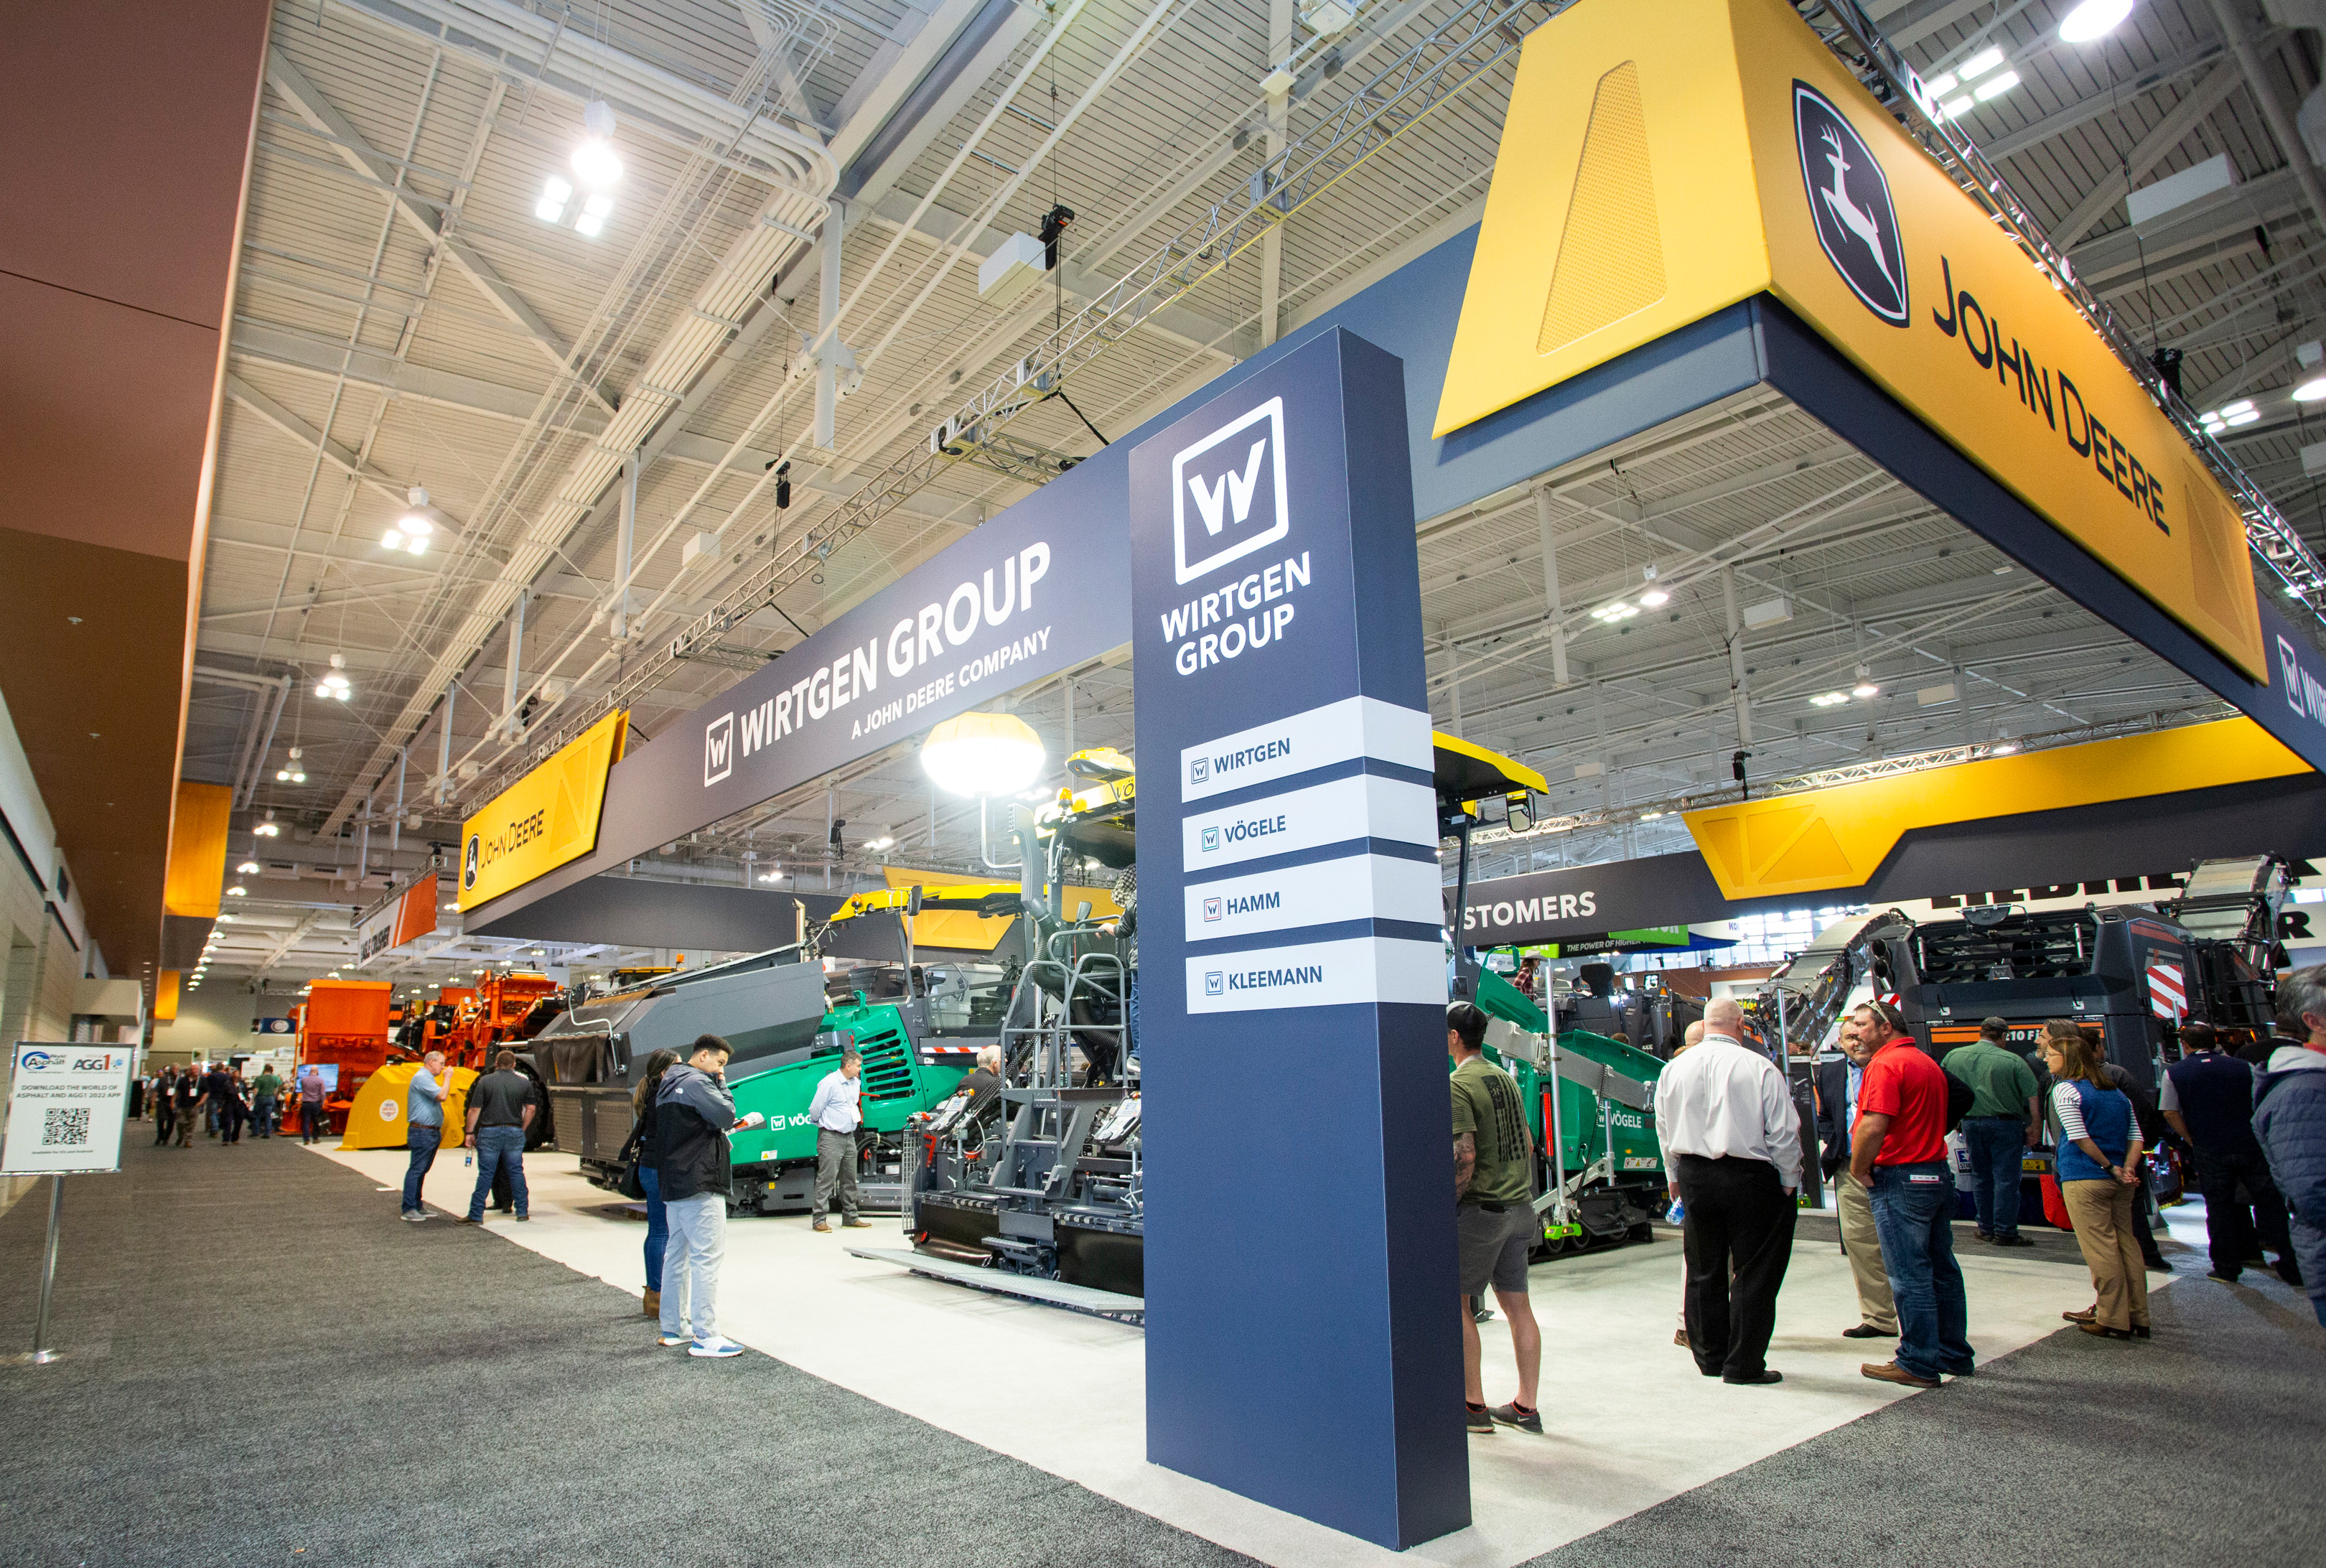 At the booth shared with our parent company, visitors from all areas of the industry learned more about the innovative machines and technological solutions from the Wirtgen Group and John Deere.